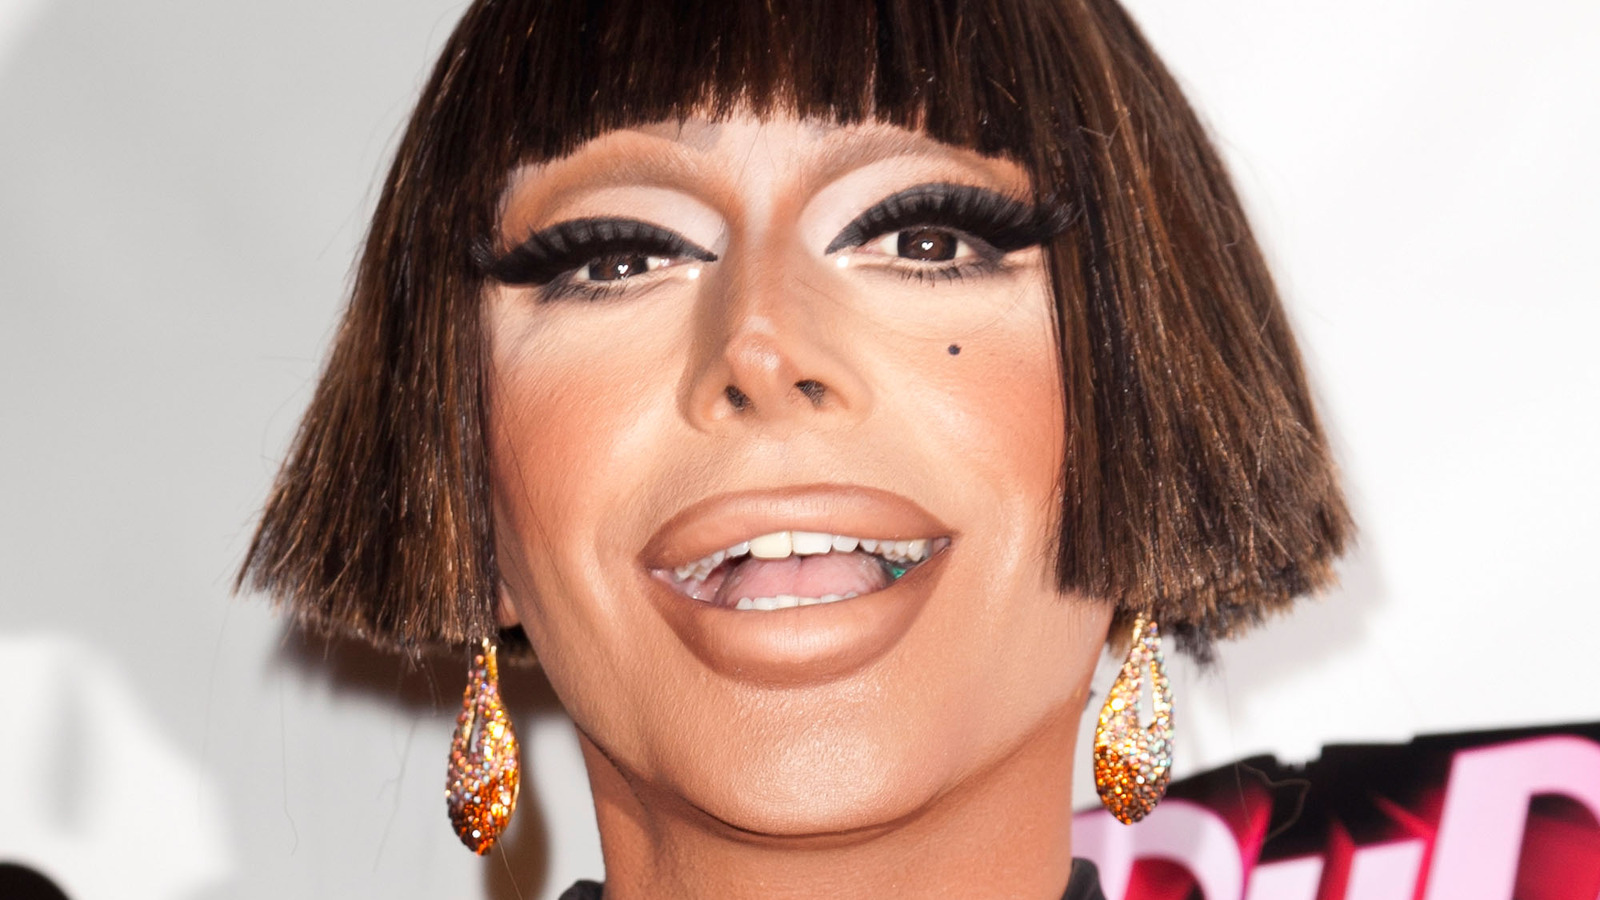 What Happened To Raven After RuPaul’s Drag Race?